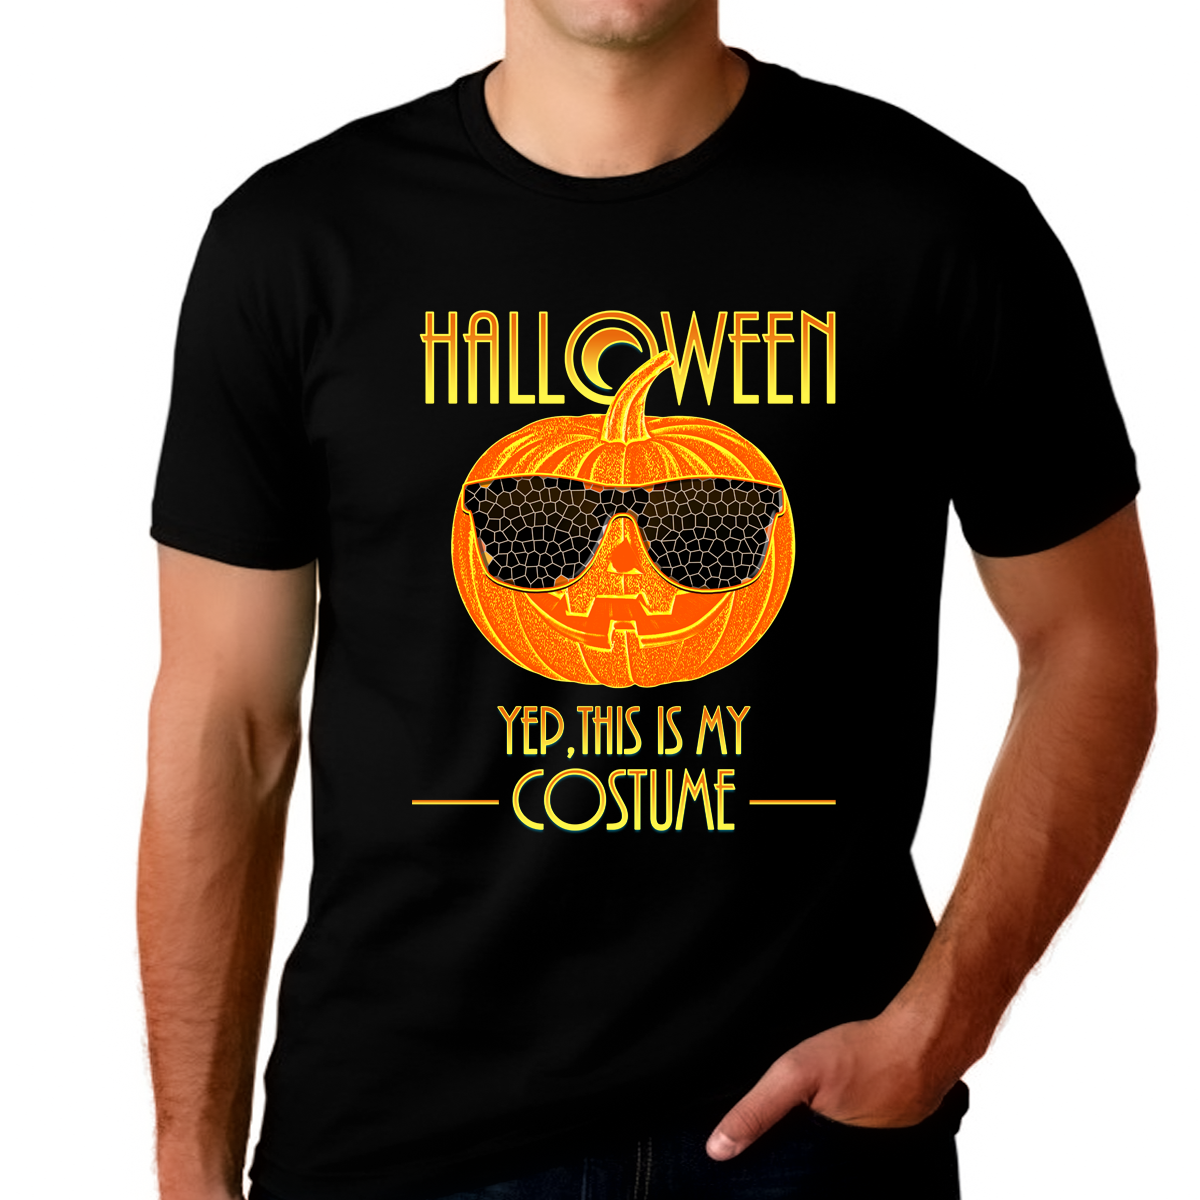 Big and Tall Halloween Shirts for Men Plus Size XL 2XL 3XL 4XL 5XL Halloween Costumes for Plus Size Men